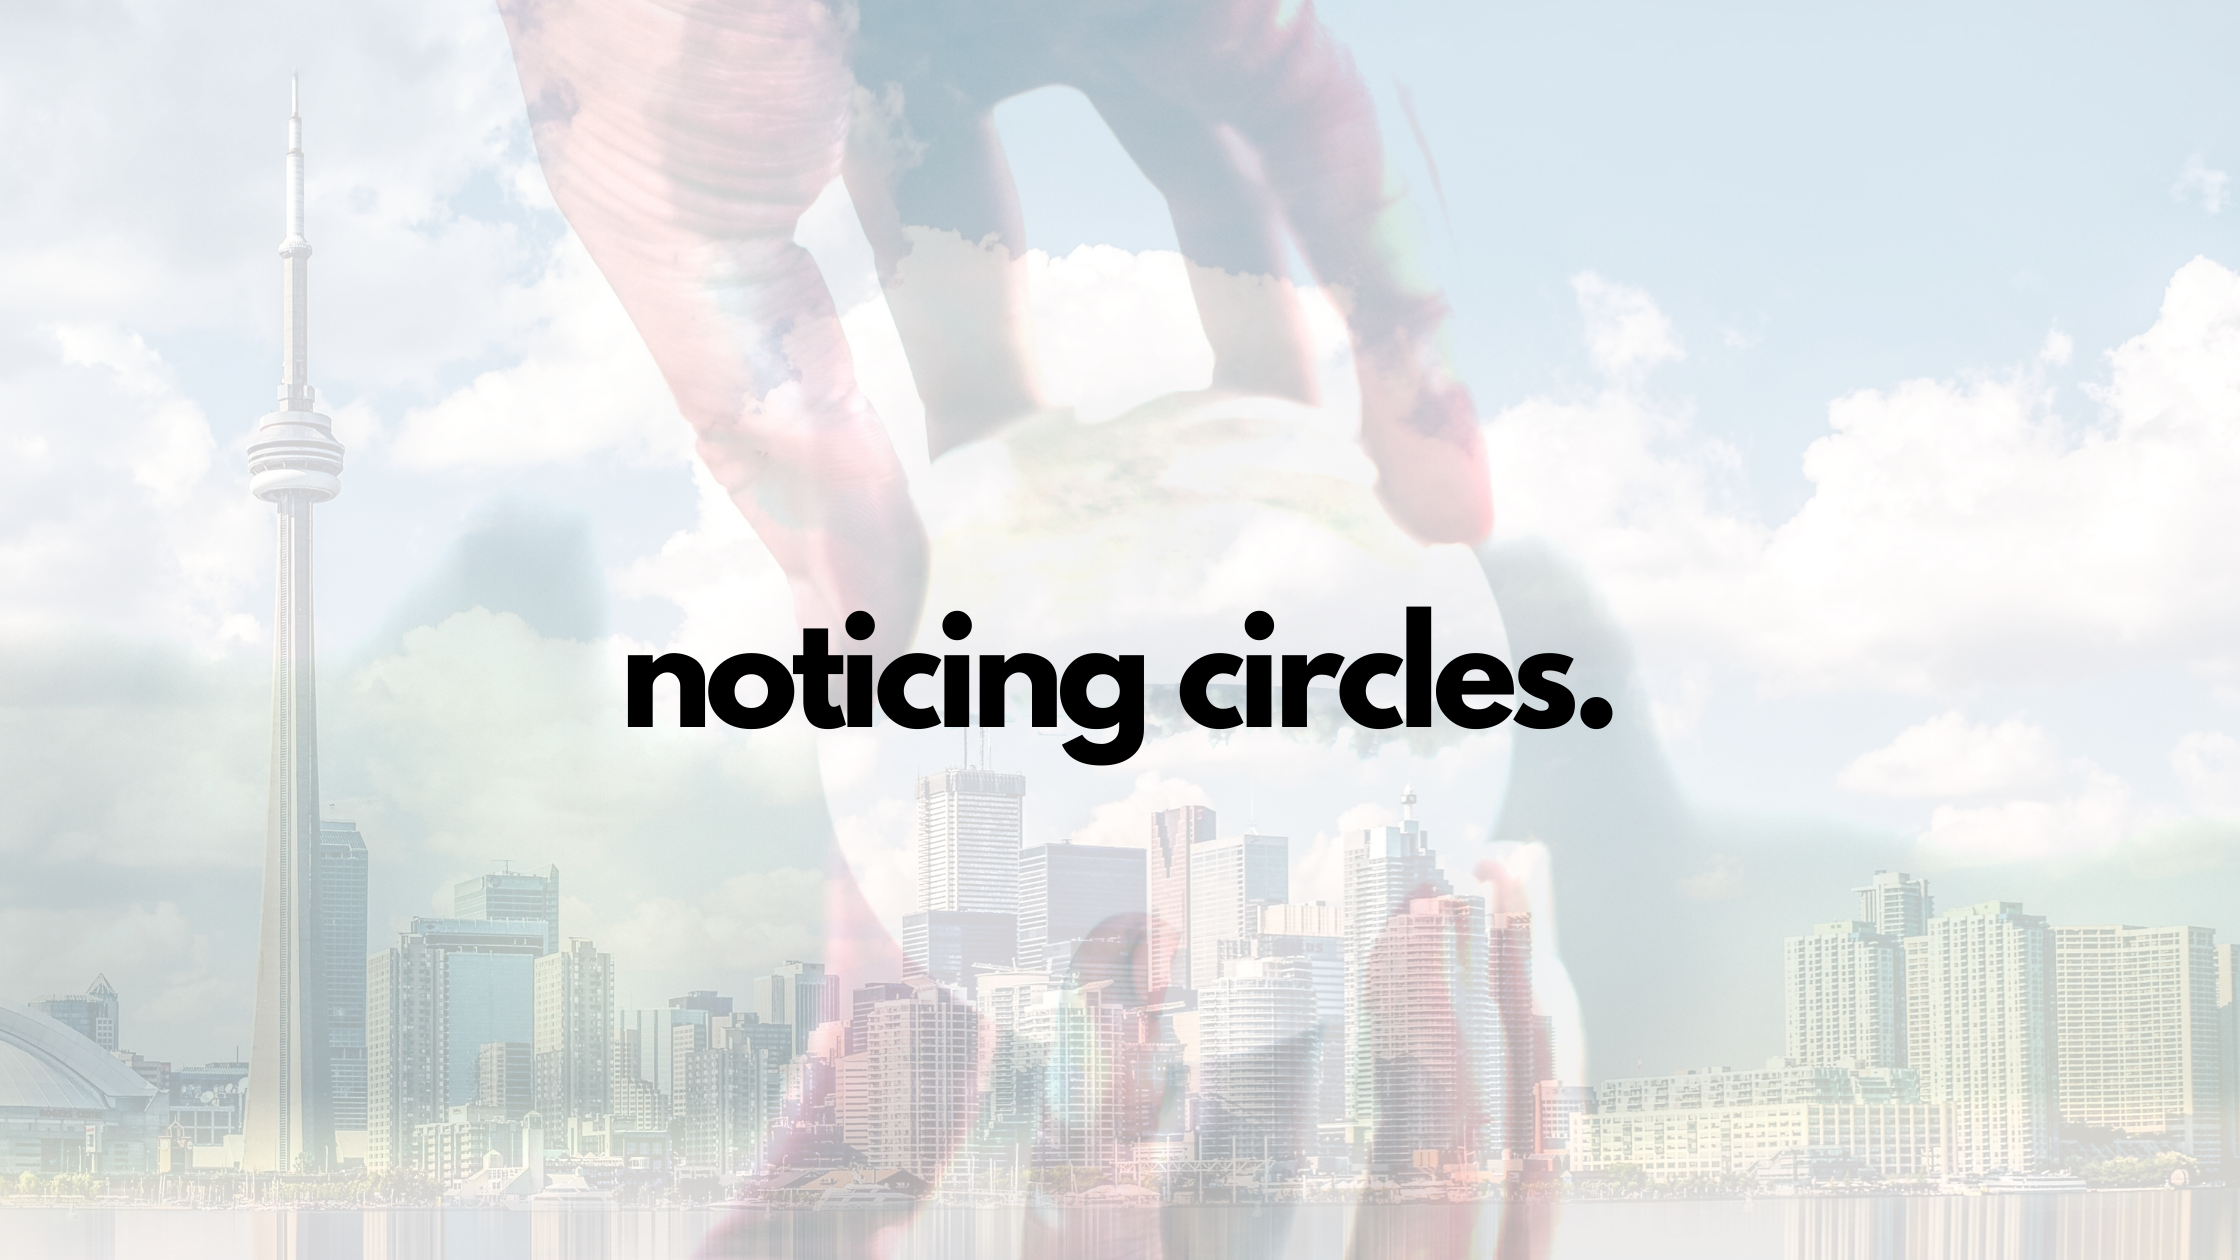 Noticing circles are a powerful coping mechanism